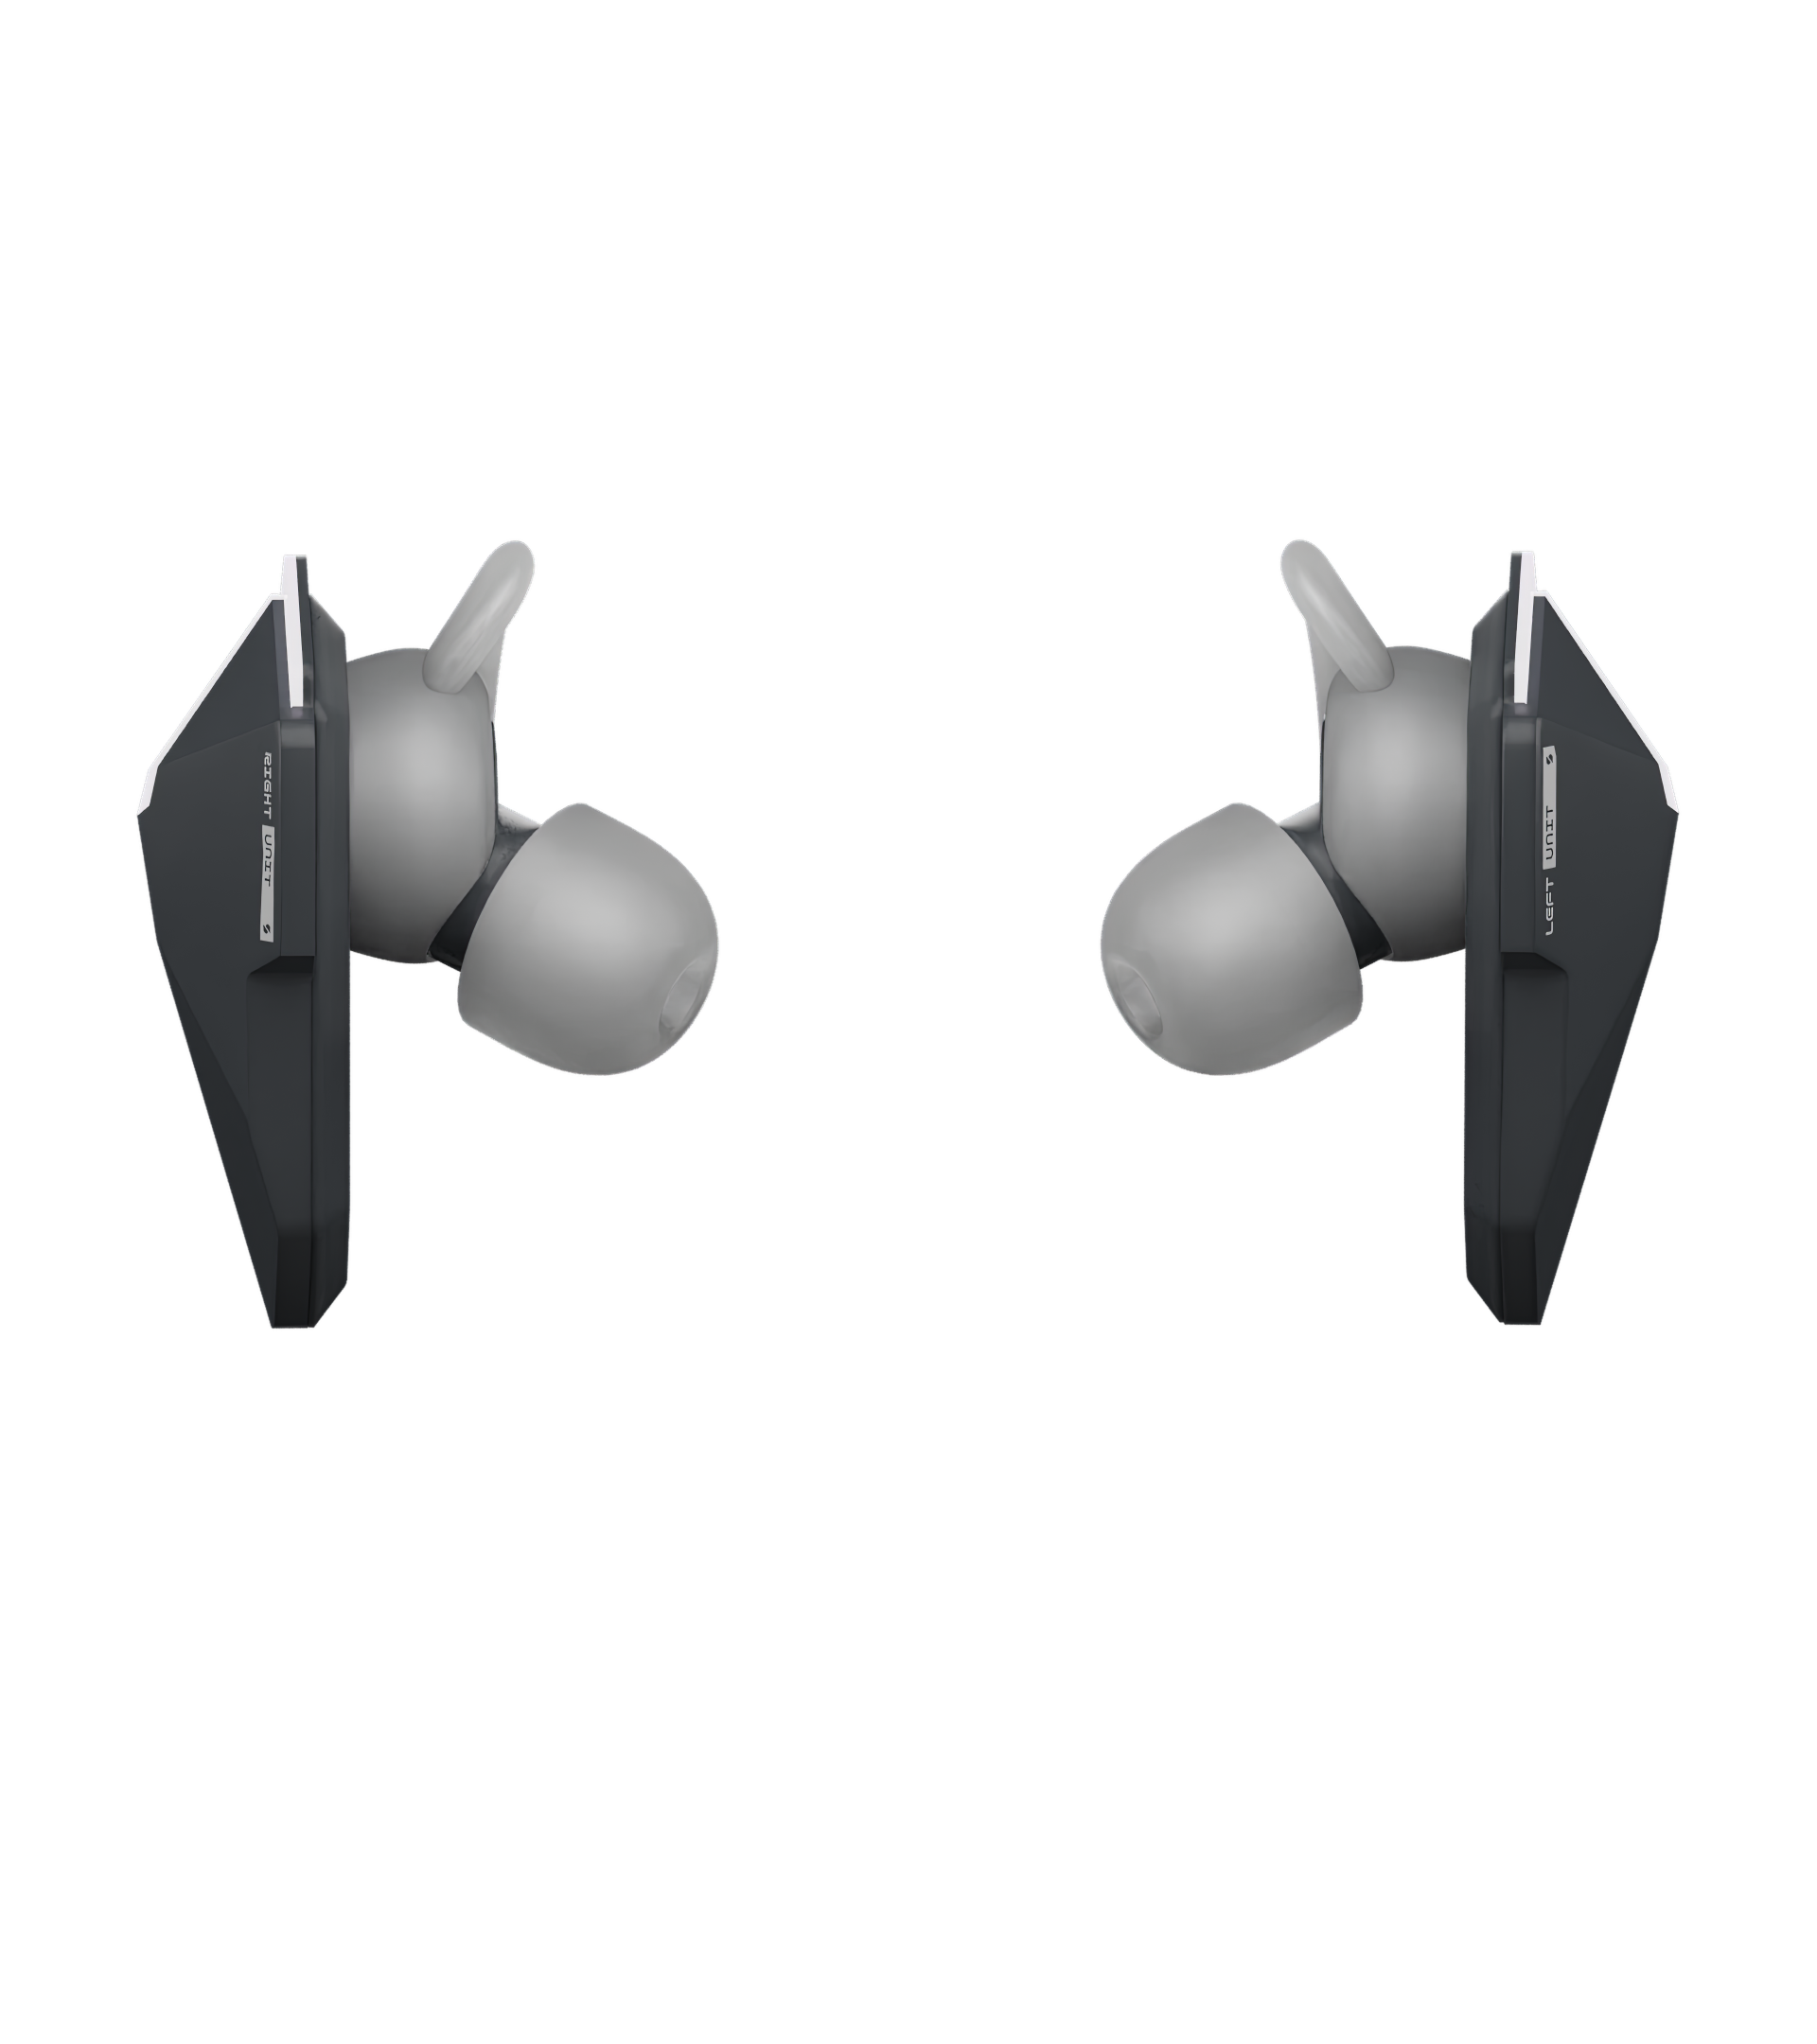 SANWEAR™ NOMAD in-ear Bluetooth earbuds top view